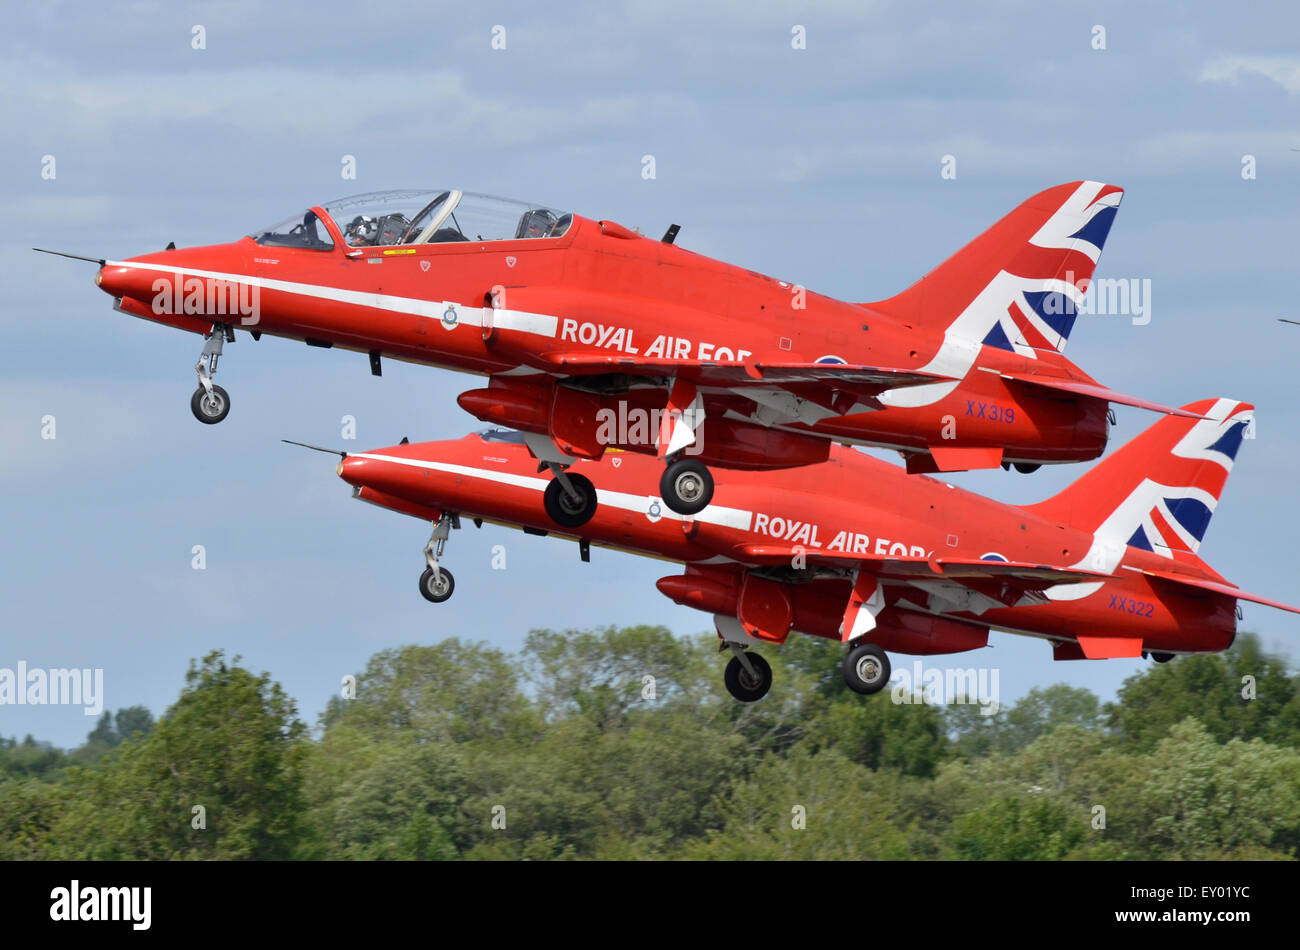 Red Arrows RAF Hawk aircraft get airborne at RIAT 2015, Fairford, UK. Credit:  Antony Nettle/Alamy Live News Stock Photo